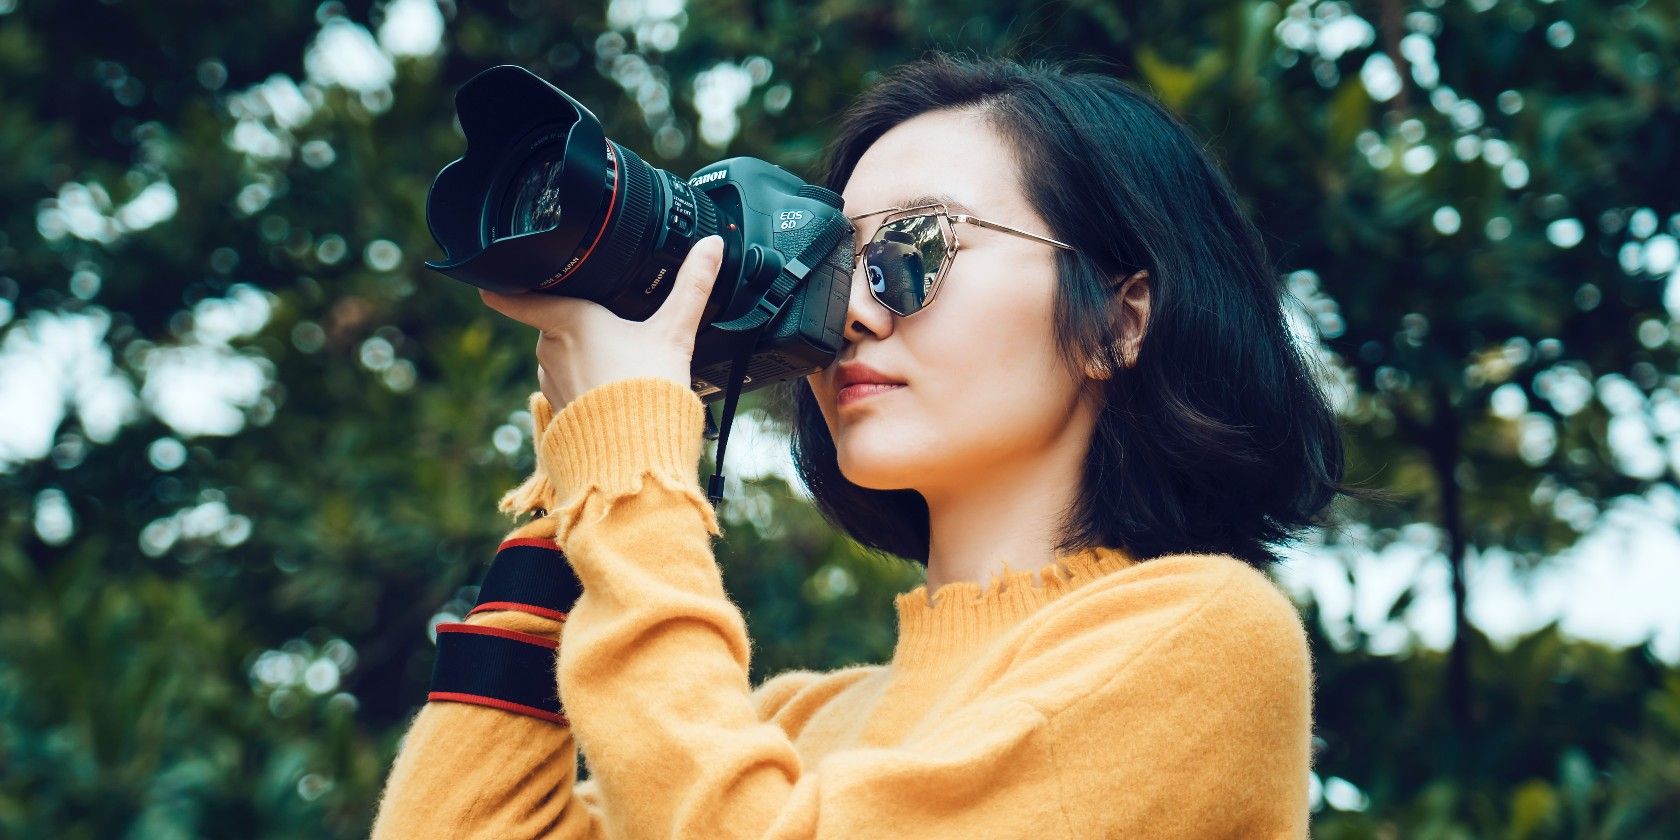 photo of woman taking photo with a camera